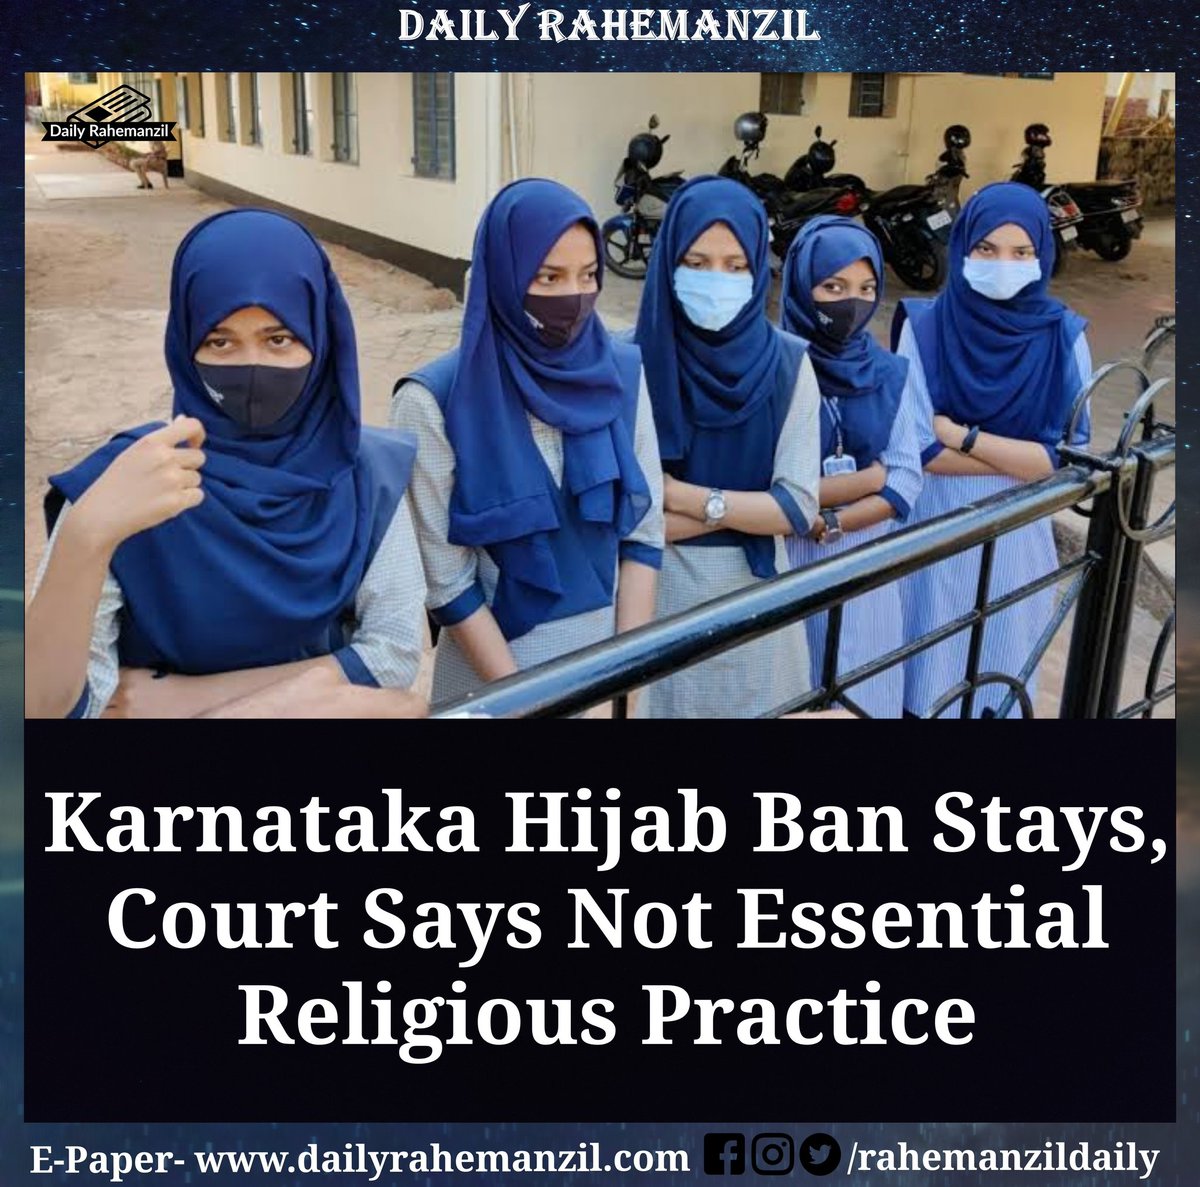 A hijab is not an essential religious practice, the Karnataka High Court said today in a huge setback to students who had challenged a ban on wearing the hijab in class. 
.
.
.
#rahemanzildaily #HijabRow #Hijab #HijabBan #Karnataka #KarnatakaHighCourt #religion #ReligiousPractice